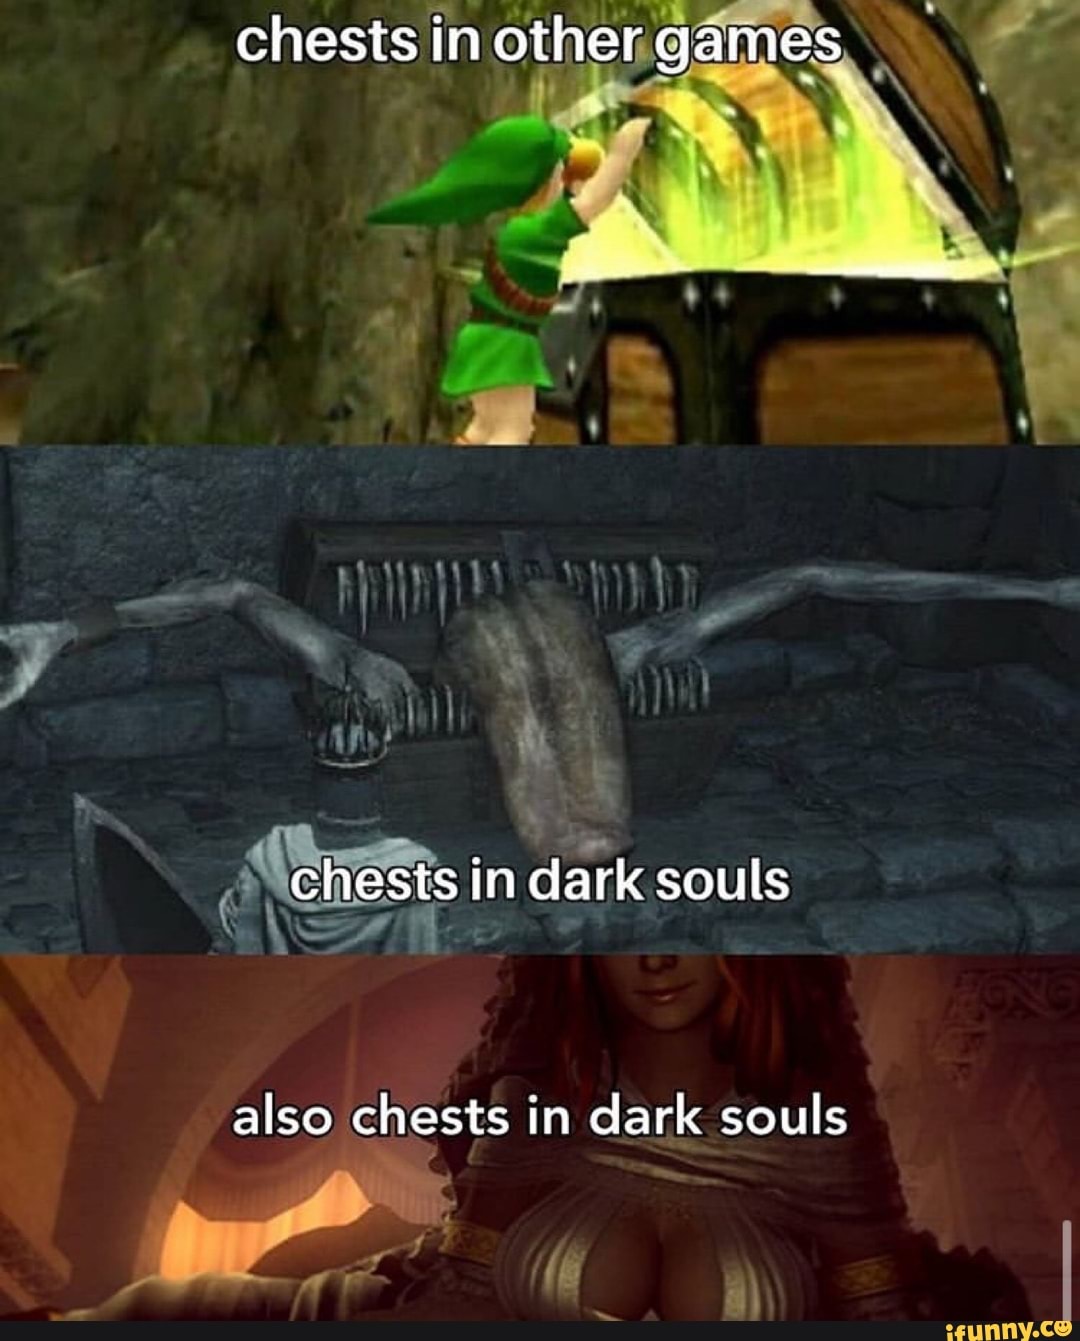 A ch esis in dark souls also chests in dark souls.